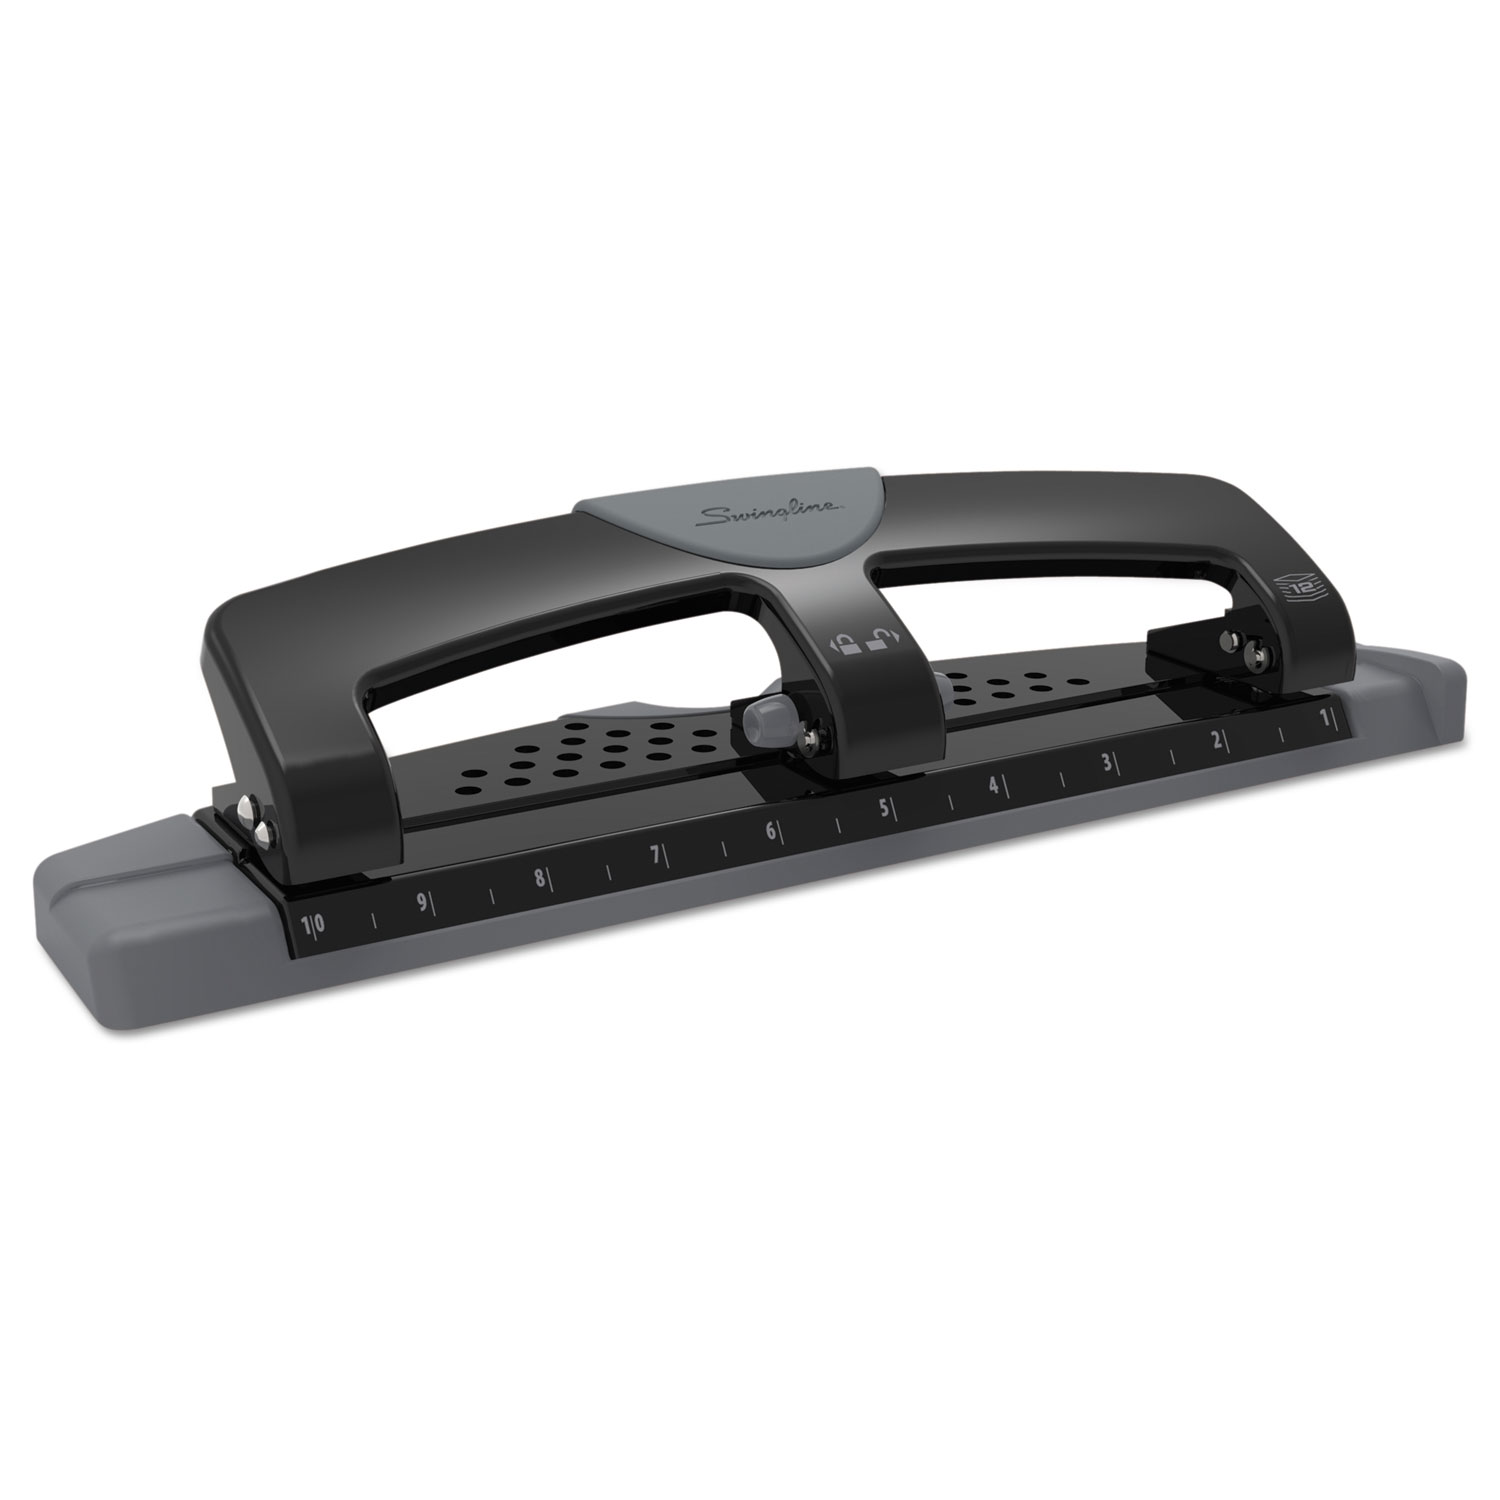 12-Sheet SmartTouch Three-Hole Punch, 9/32 Holes, Black/Gray